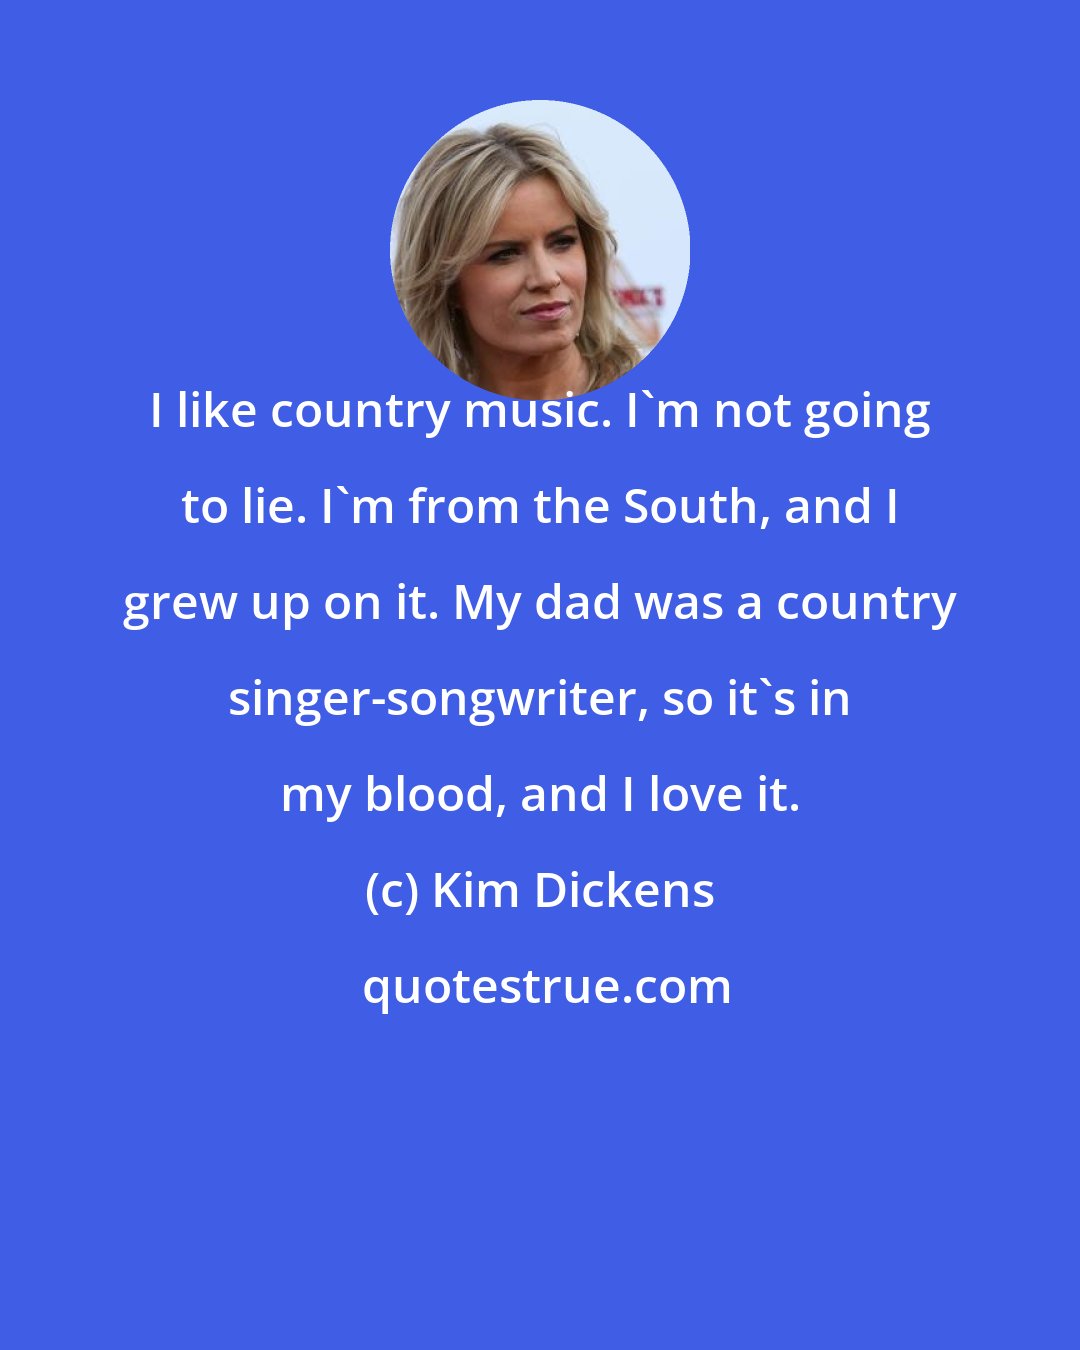 Kim Dickens: I like country music. I'm not going to lie. I'm from the South, and I grew up on it. My dad was a country singer-songwriter, so it's in my blood, and I love it.